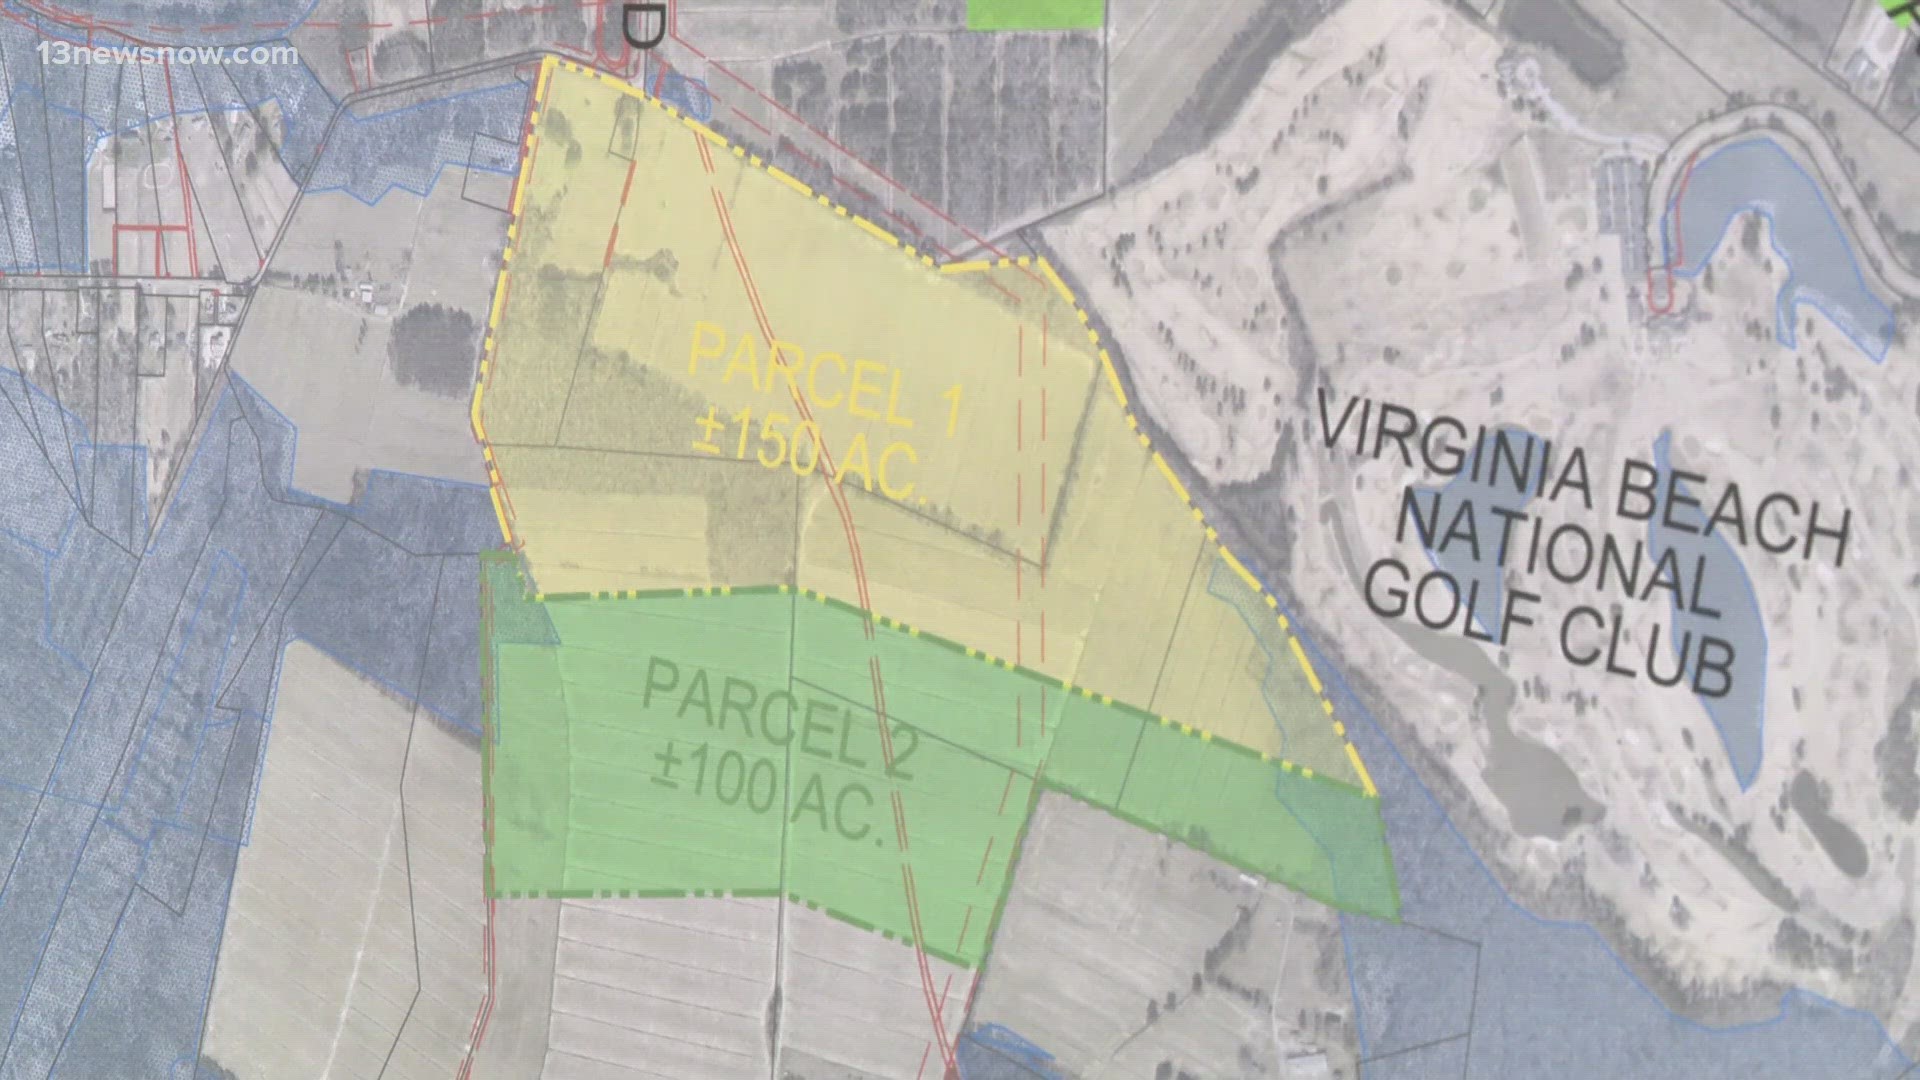 Citizens shared their thoughts surrounding the development proposal on 150 acres of city-owned farmland in the southern section of Virginia Beach.